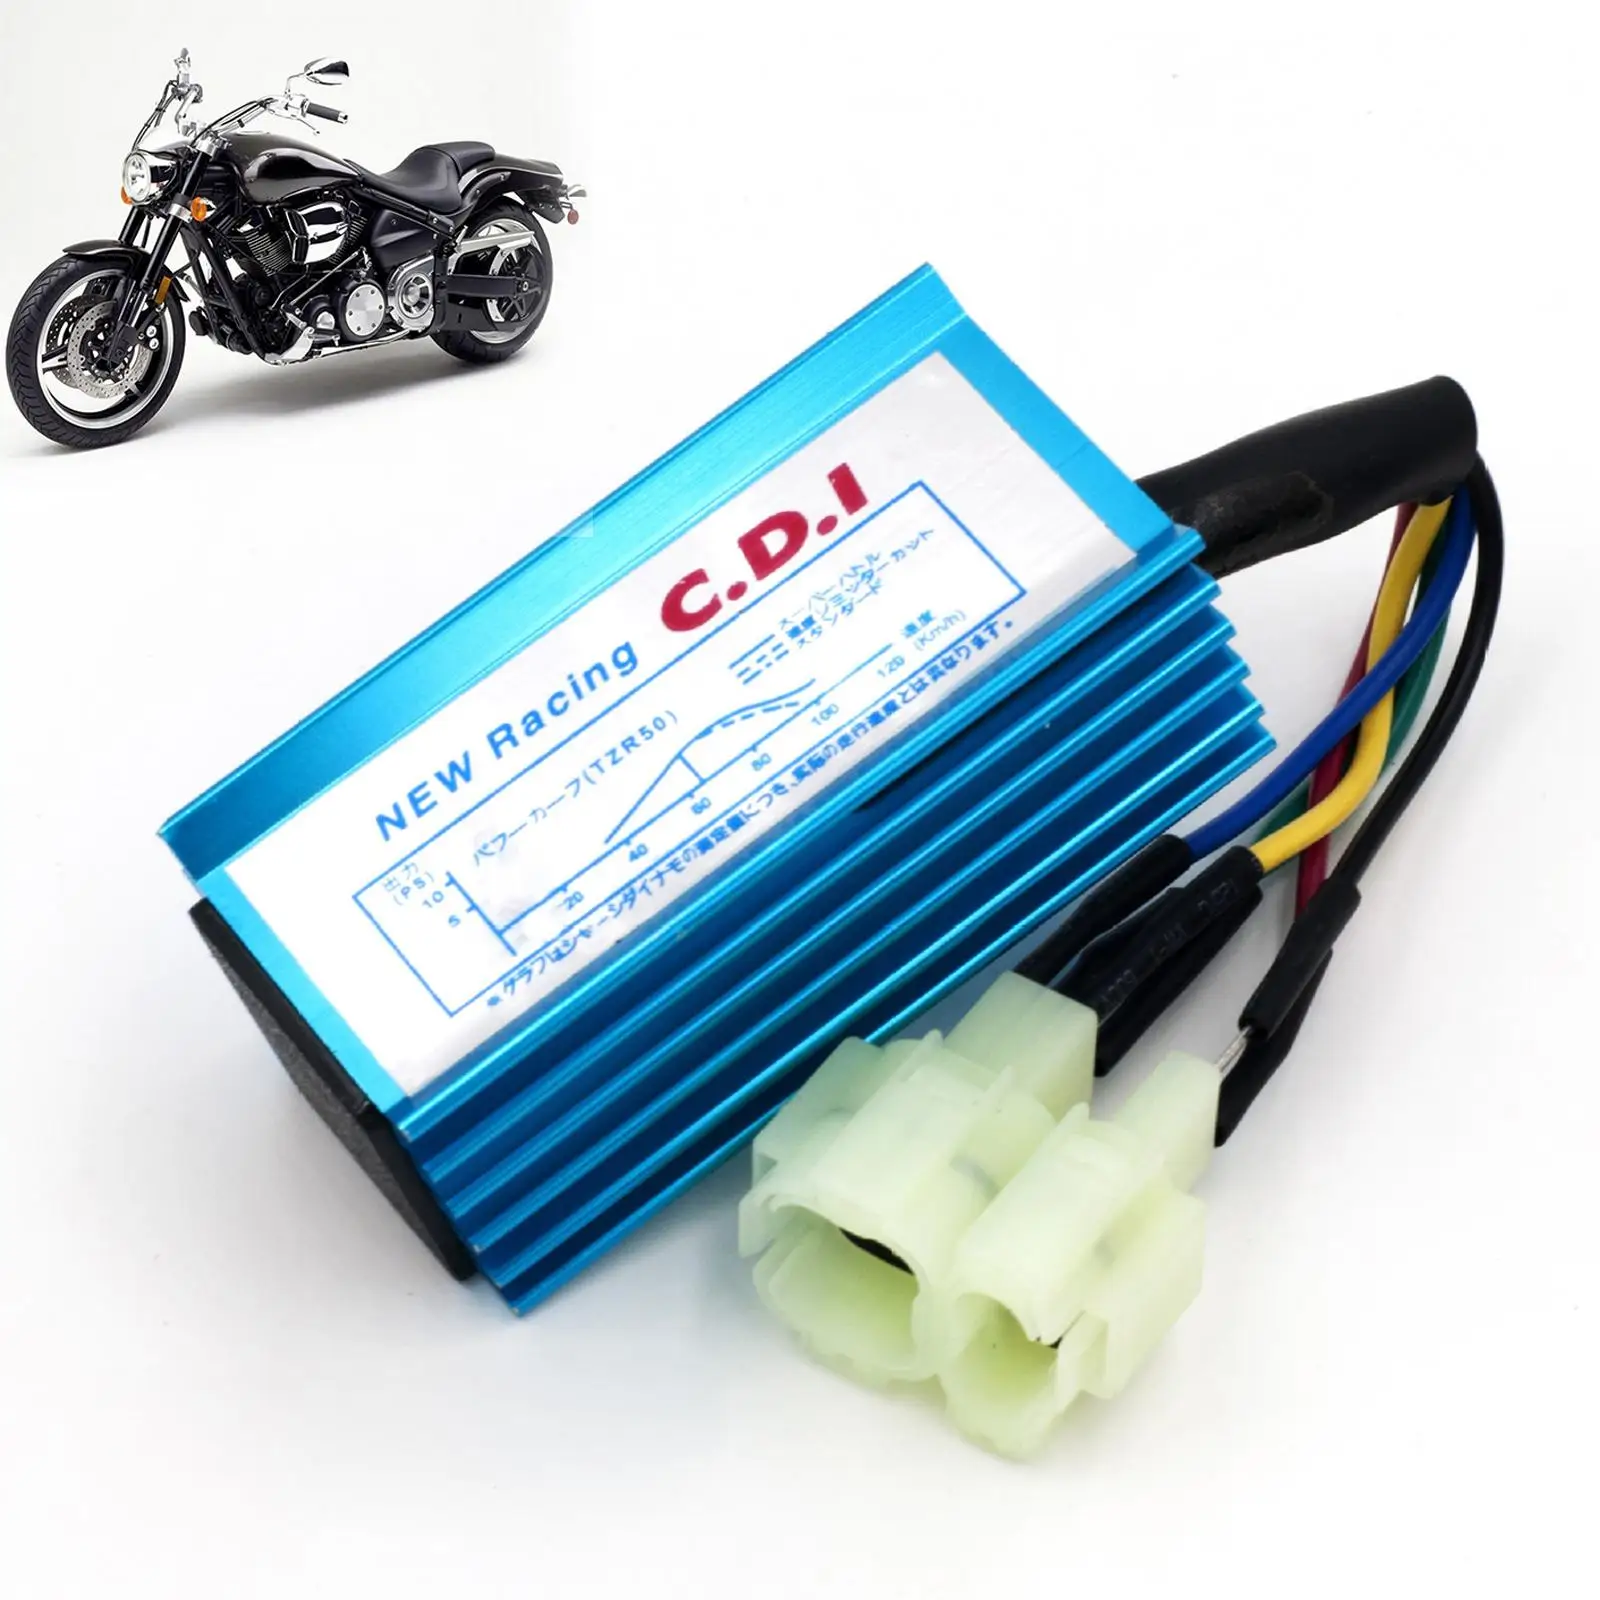 6 Pin Gy6 Racing Cdi Box Aluminum Alloy with Ignition Coil Fit for Gy6 50cc-250cc Series Engines Motorcycle Go-Karts Scooters